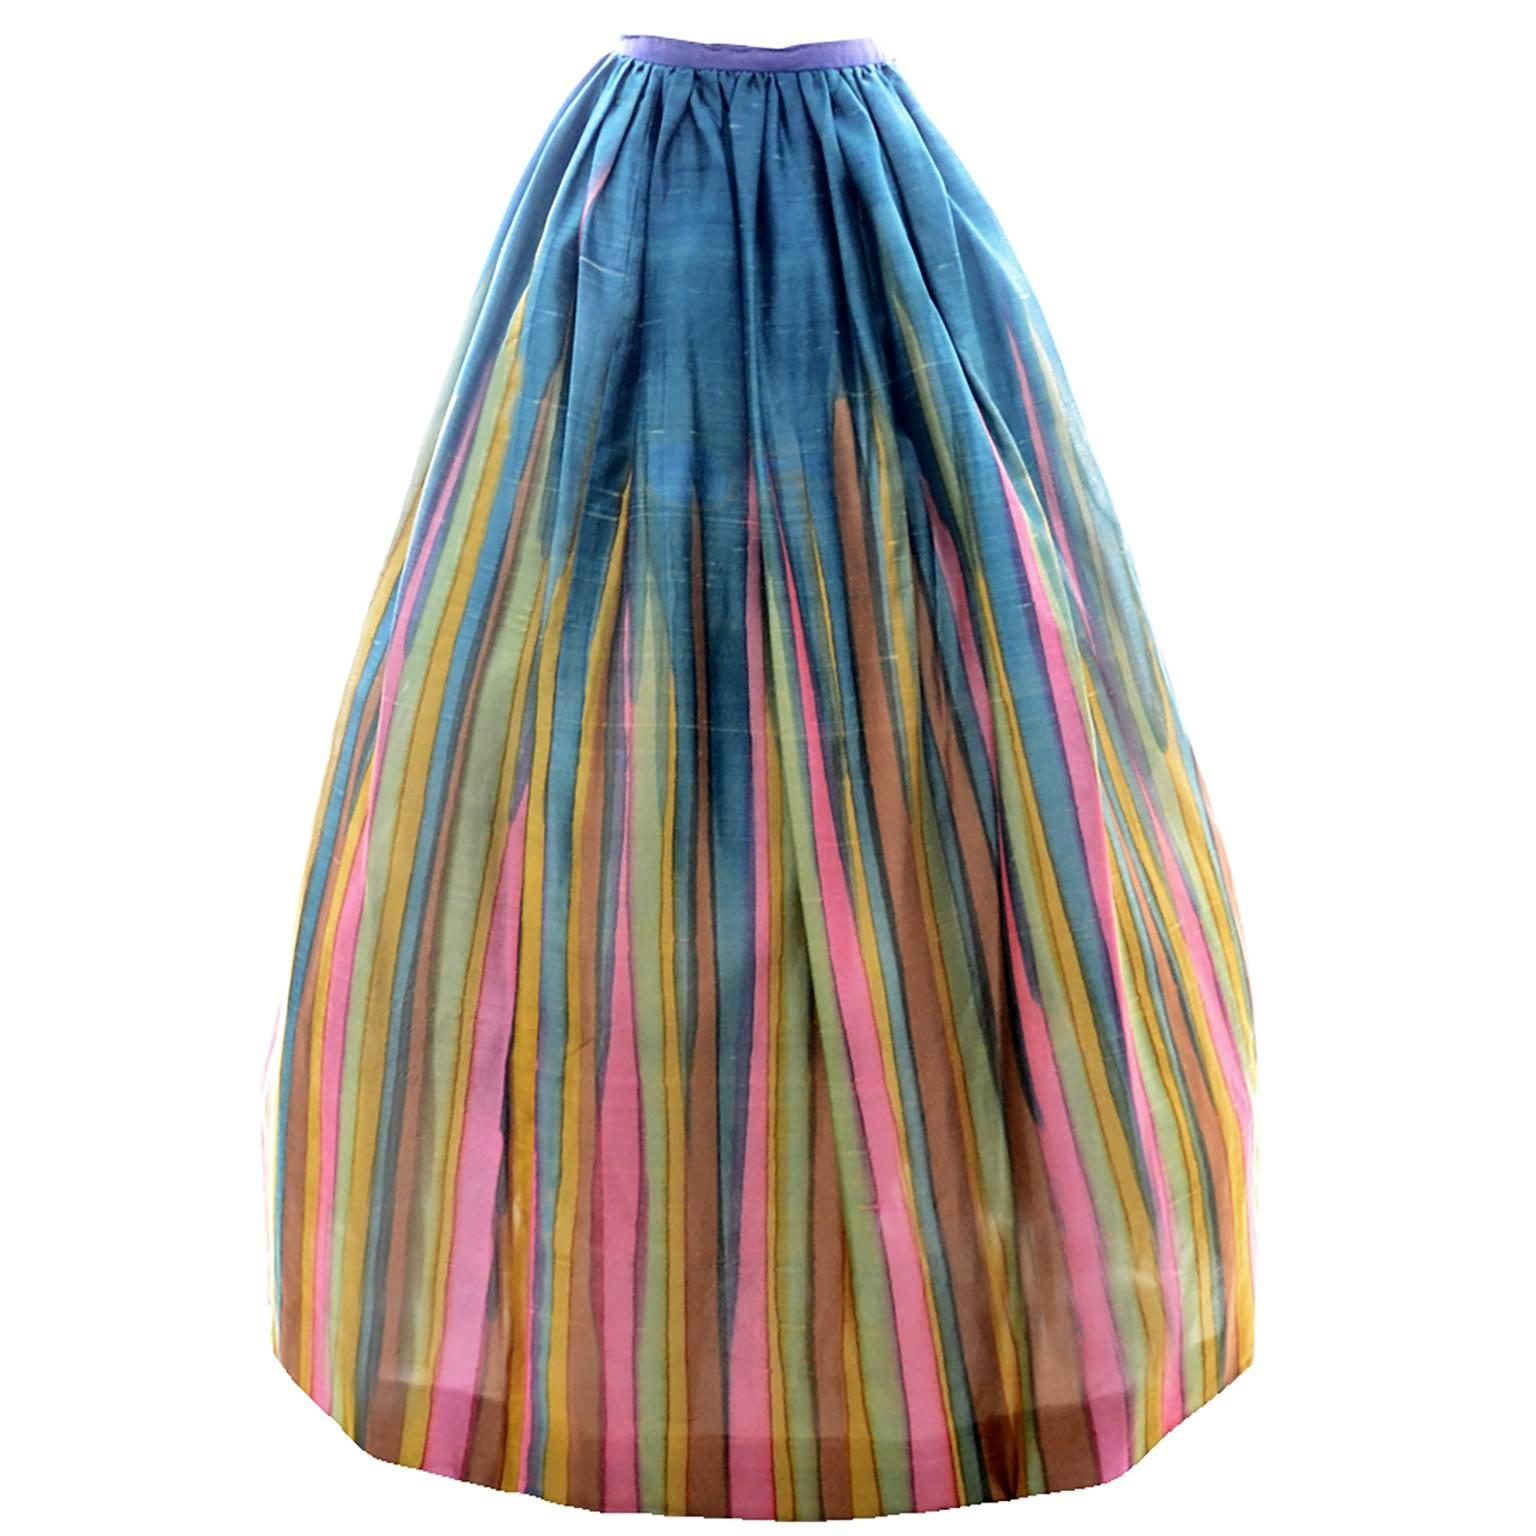 Vintage Long Silk Skirt in Watercolor Stripe Print from Exceptional Estate